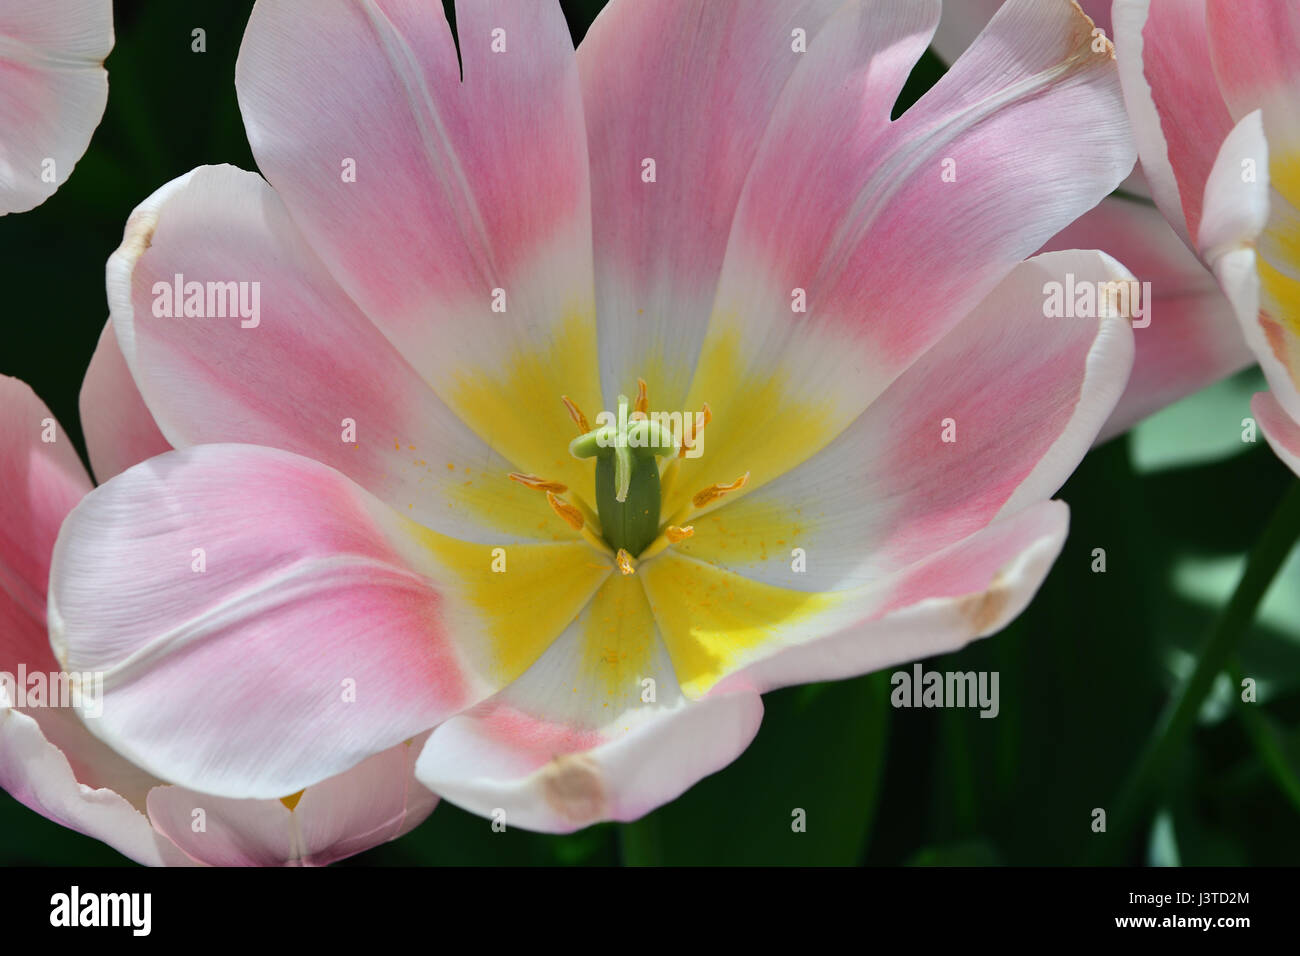 close up of opened pink  and white tulip with yellow highlights Stock Photo